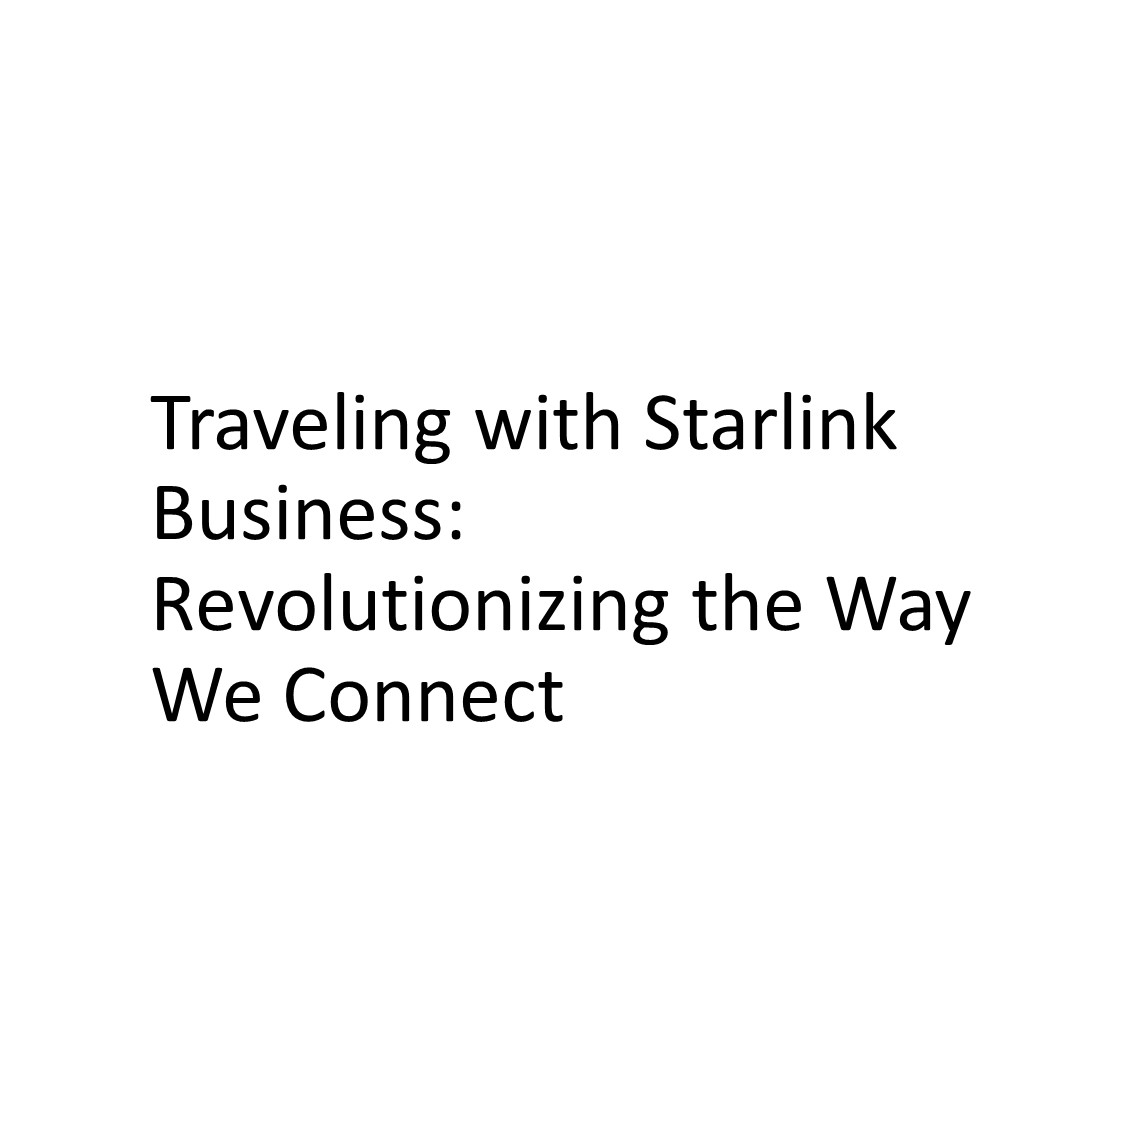 Traveling with Starlink Business: Revolutionizing the Way We Connect